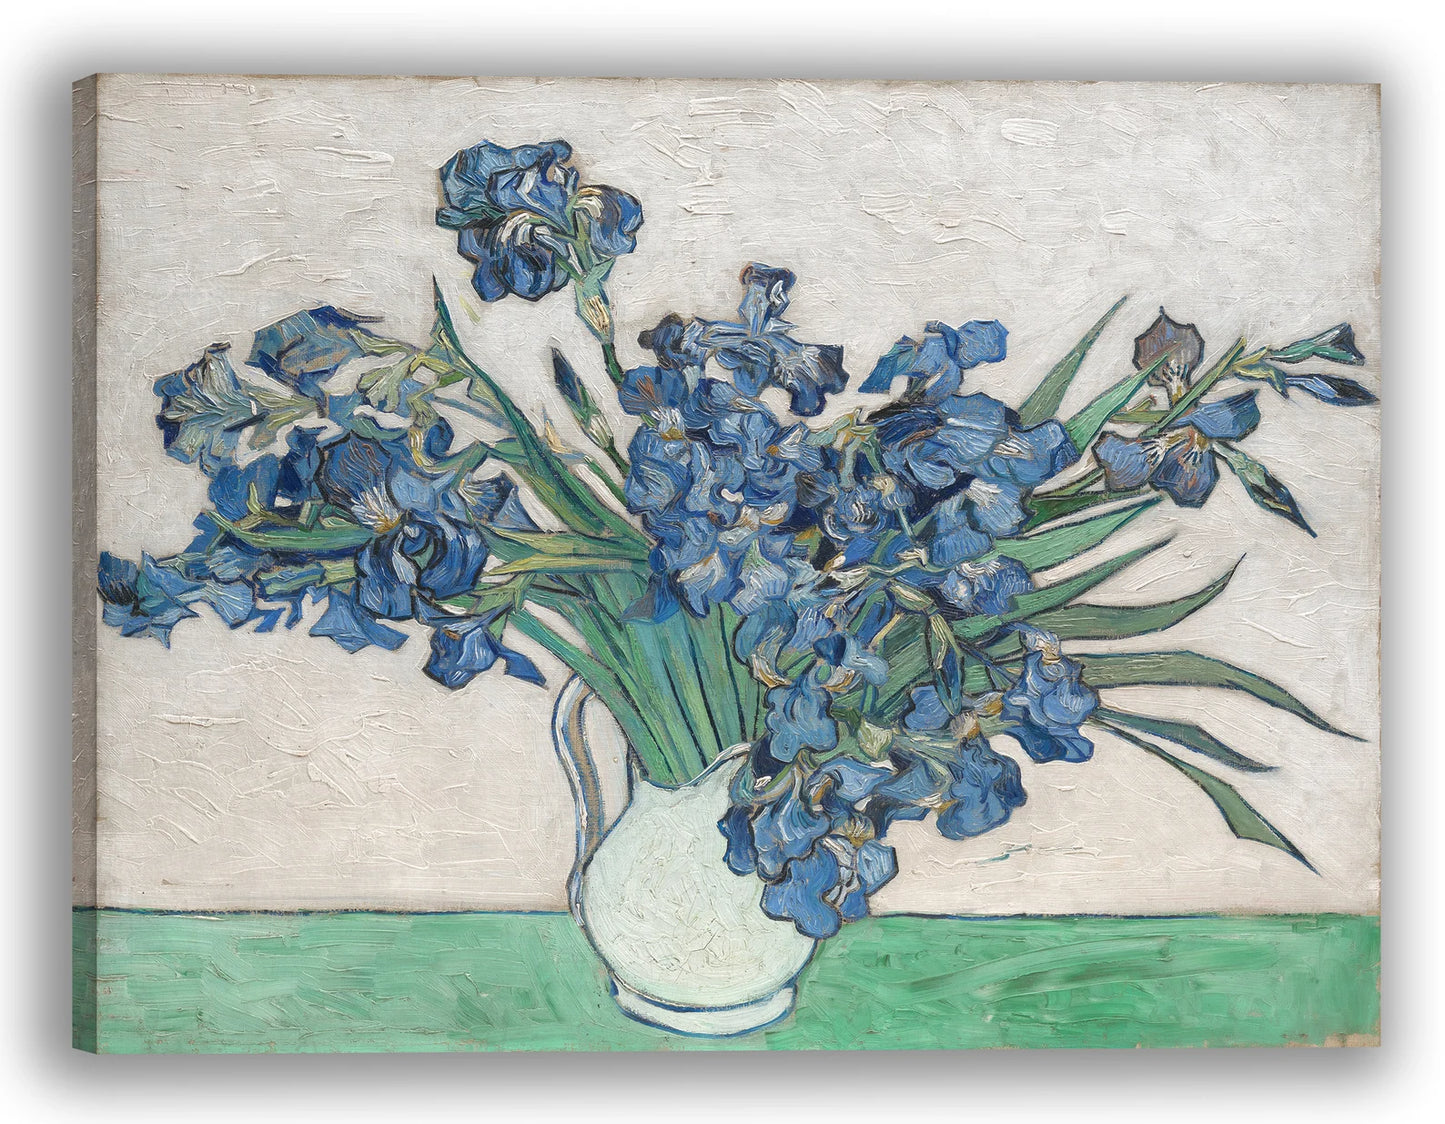 Hand-painted art "Irises" by Vincent Van Gogh In May 1890, high quality reproduction of - Wrapped Canvas Painting